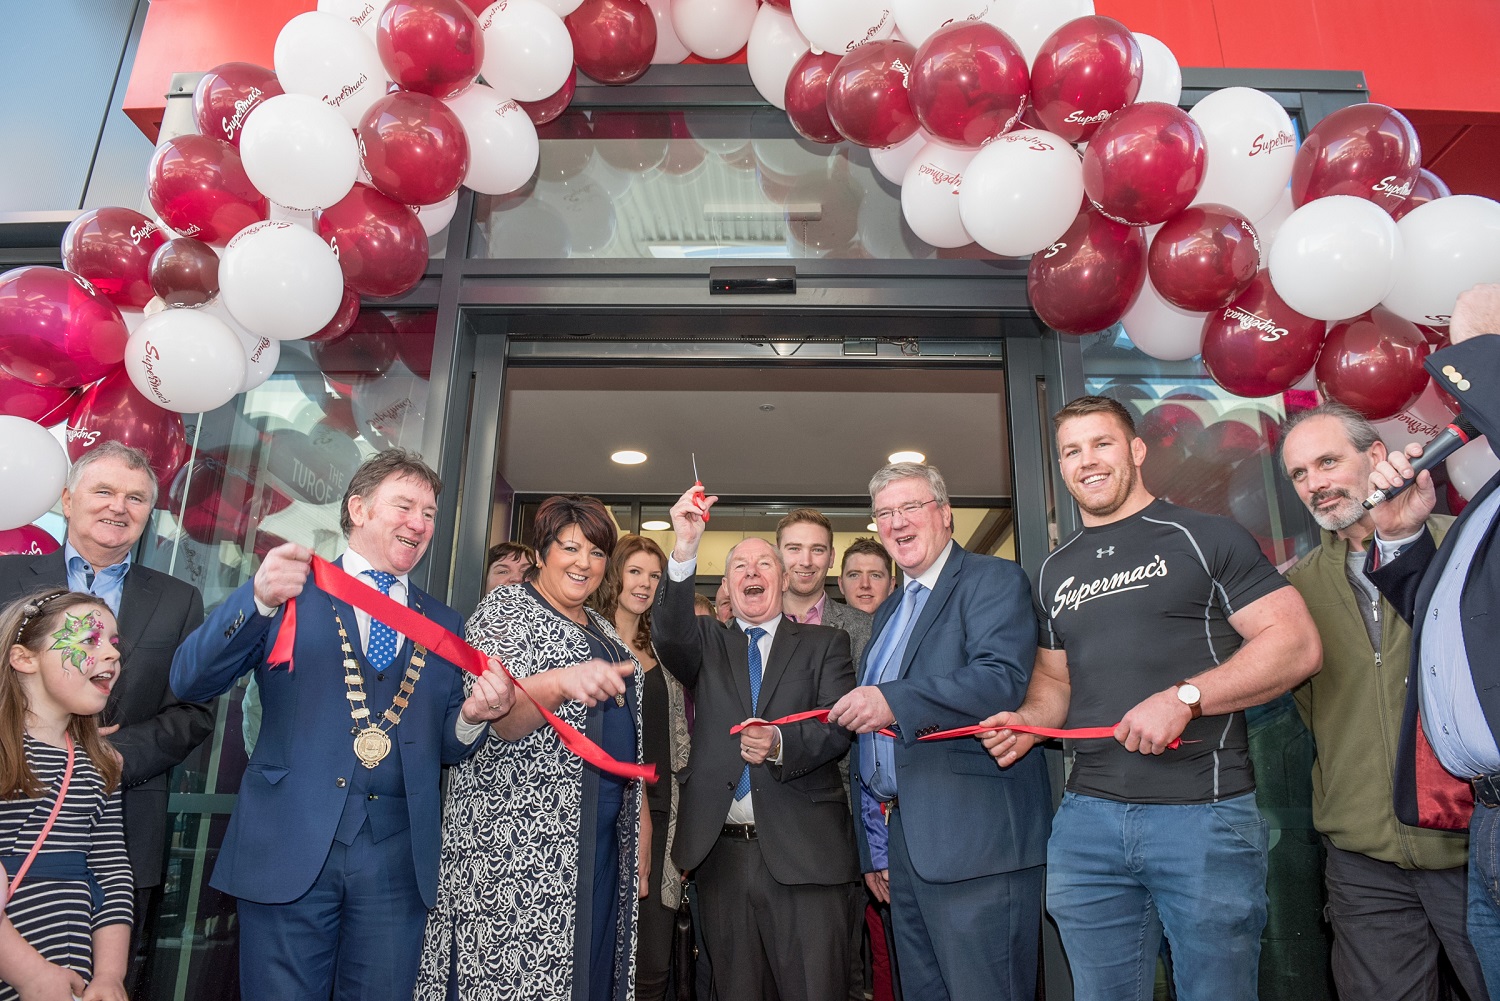 Star-studded opening for Galway Plaza